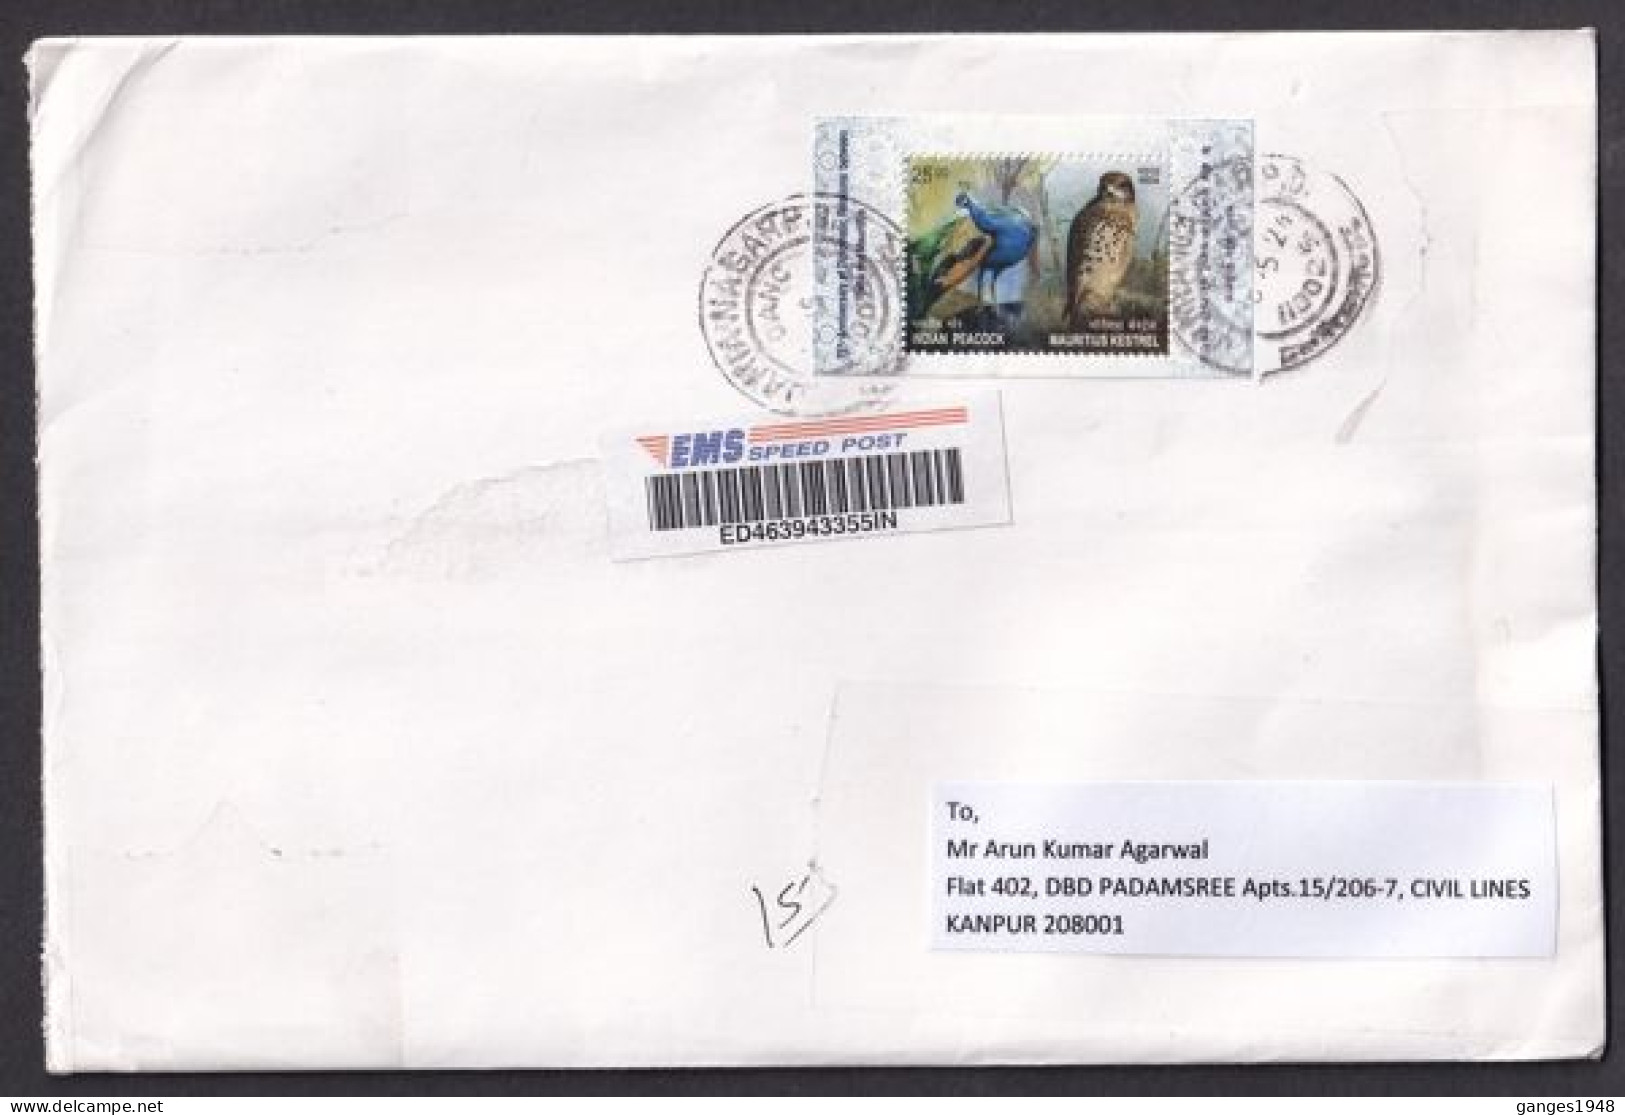 India - Mauritius Joint Issue  Peacock And Kestrel Bird Of Prey  2v MS On Mailed Cover  #  36603  D  Inde Indien - Peacocks